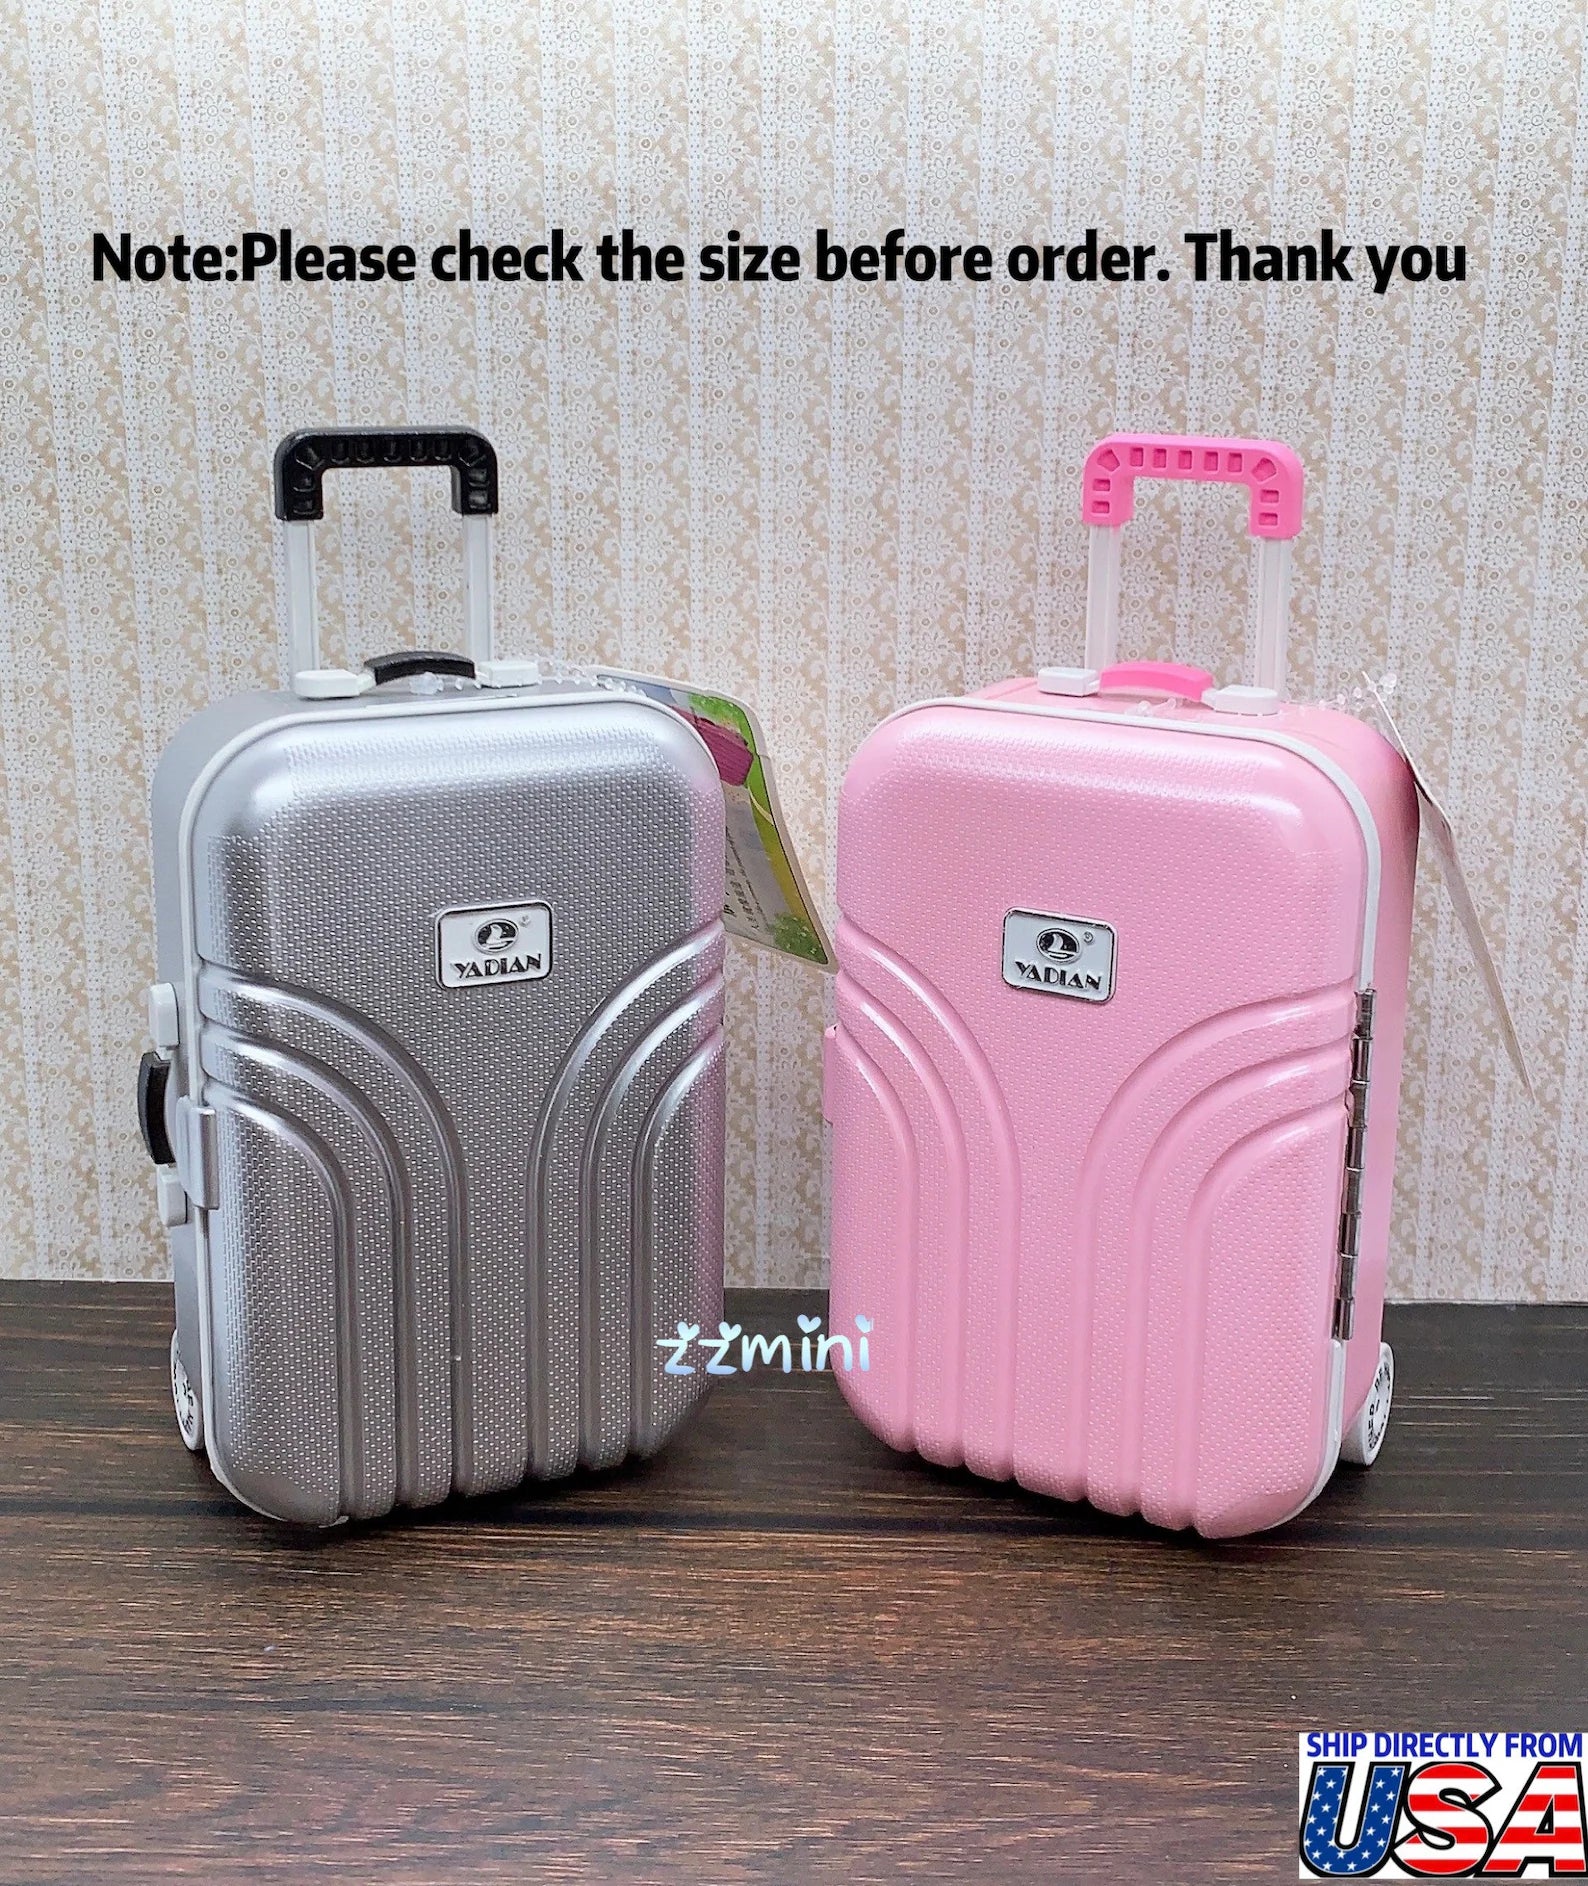 Dollhouse Miniature Suitcase Travel Luggage Money Can Dolls Toy Accessories Holiday Gift